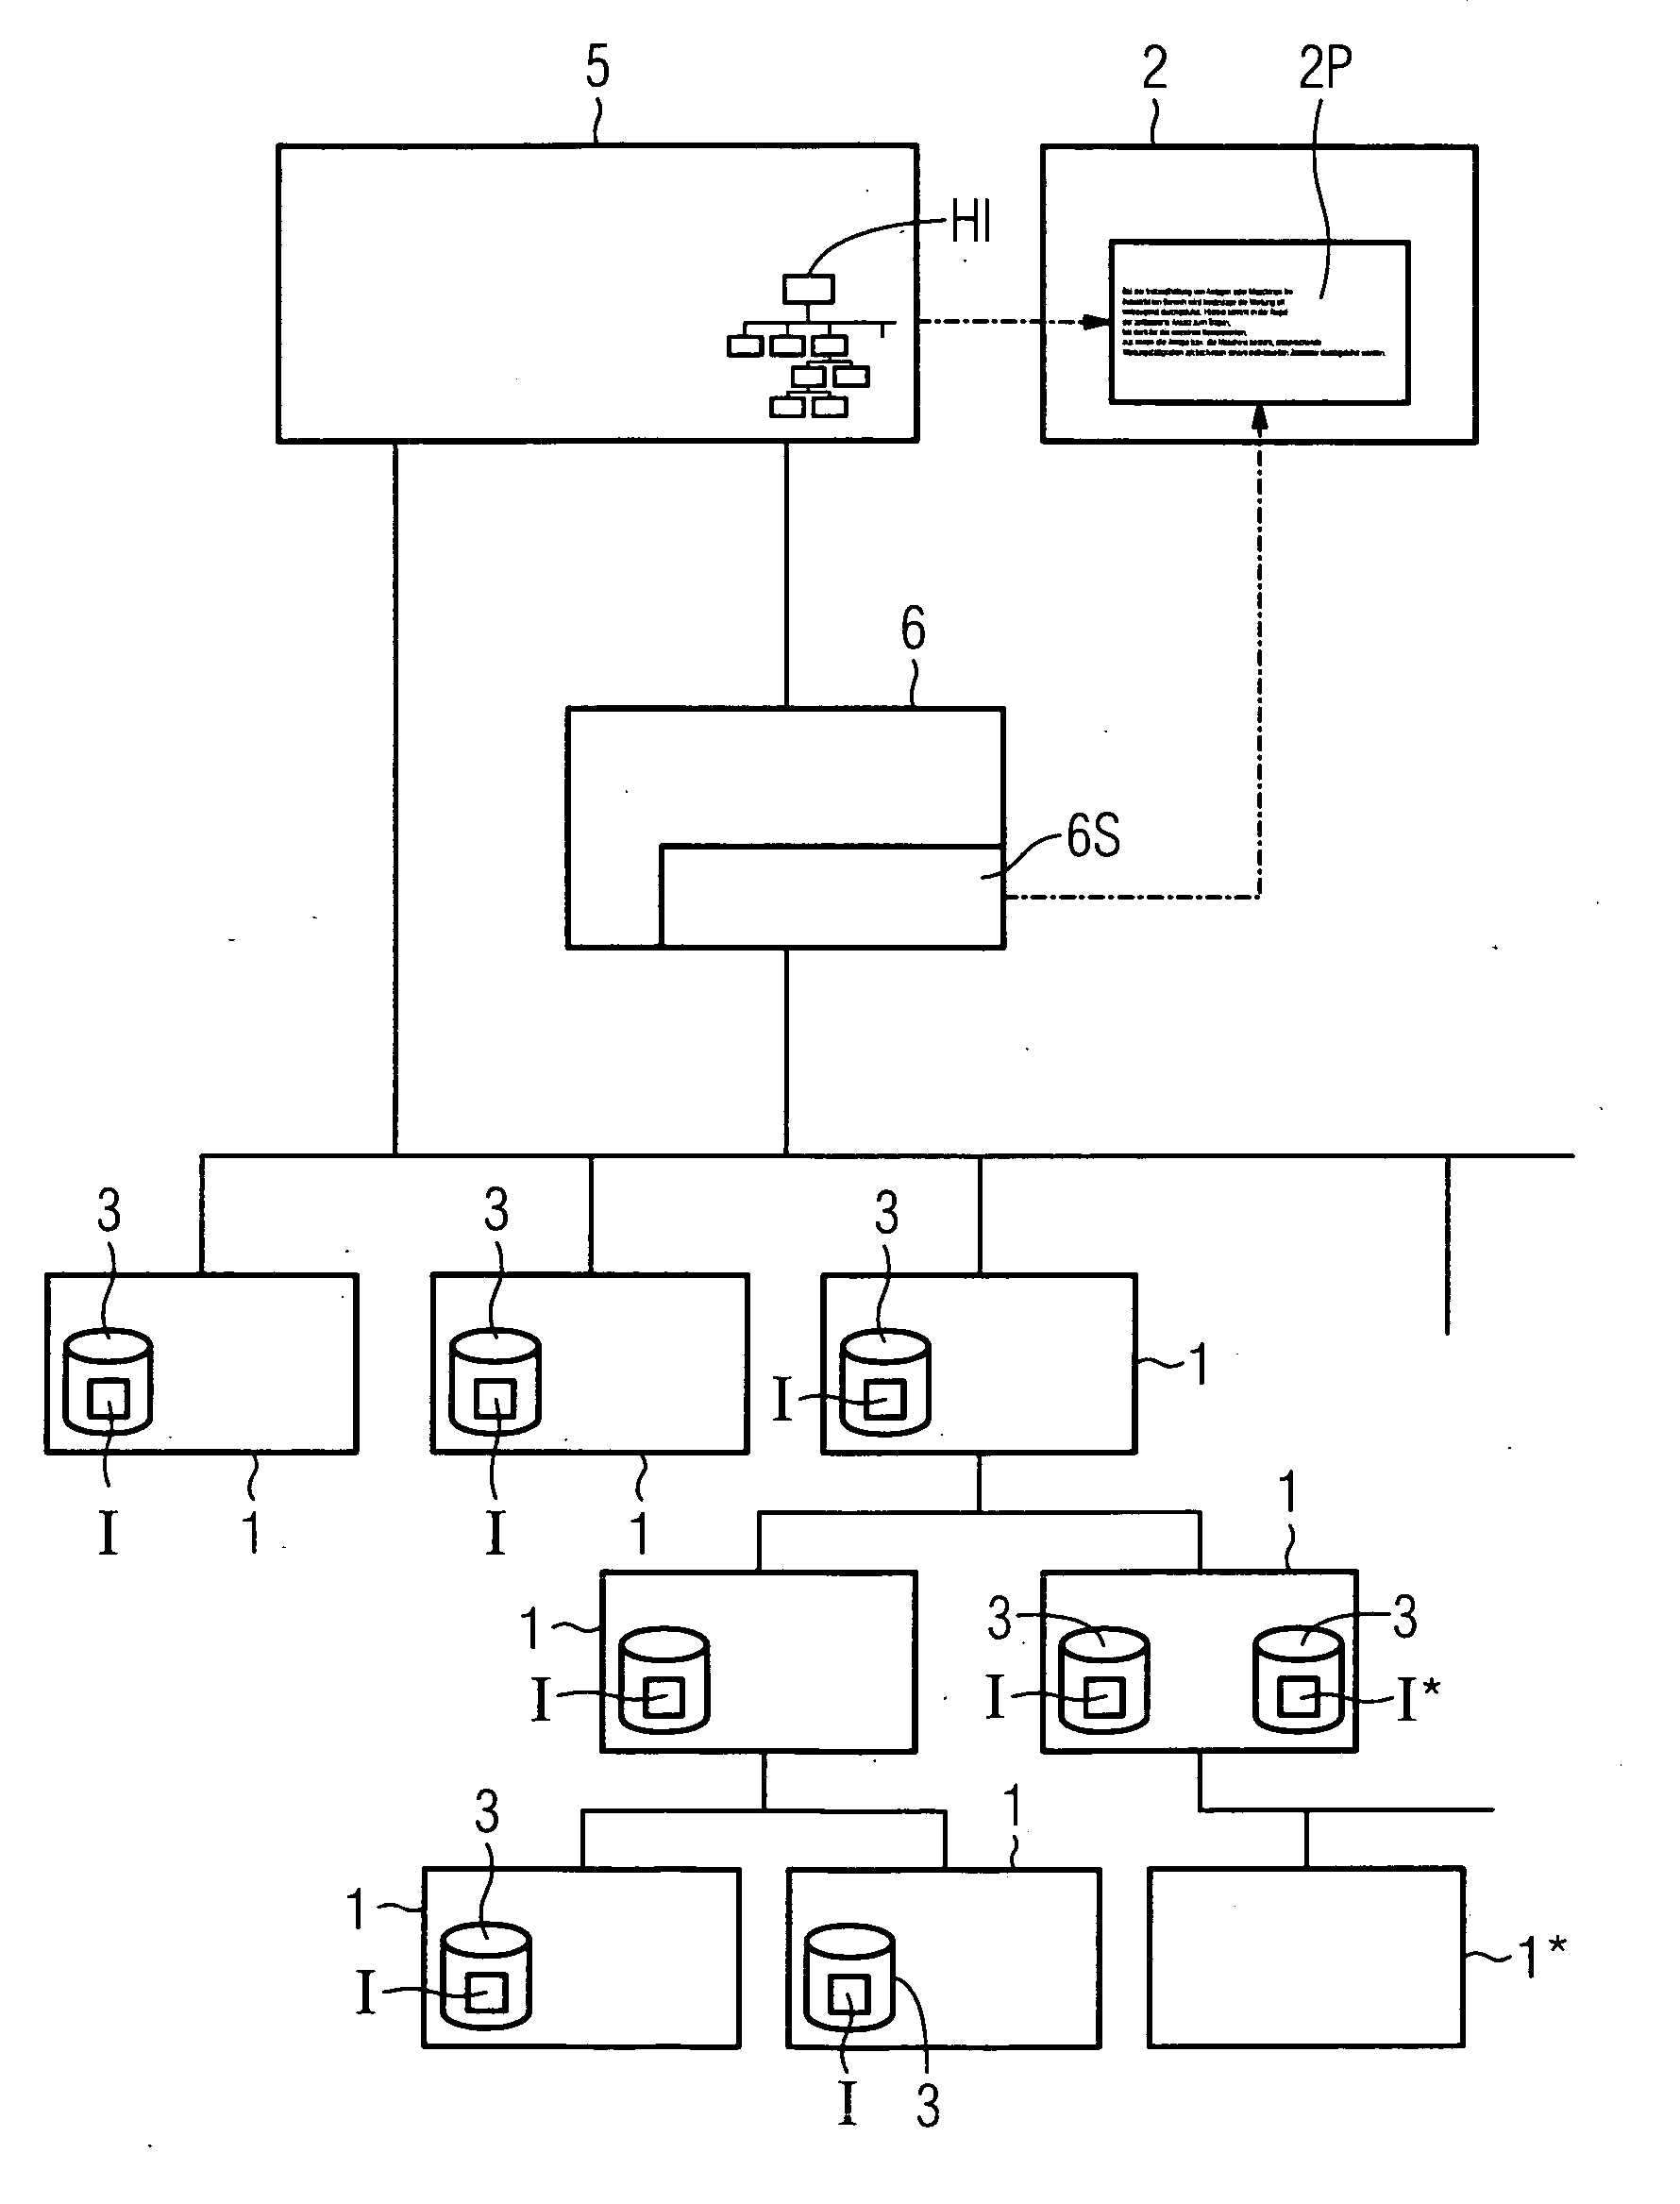 System for creating maintenance plans